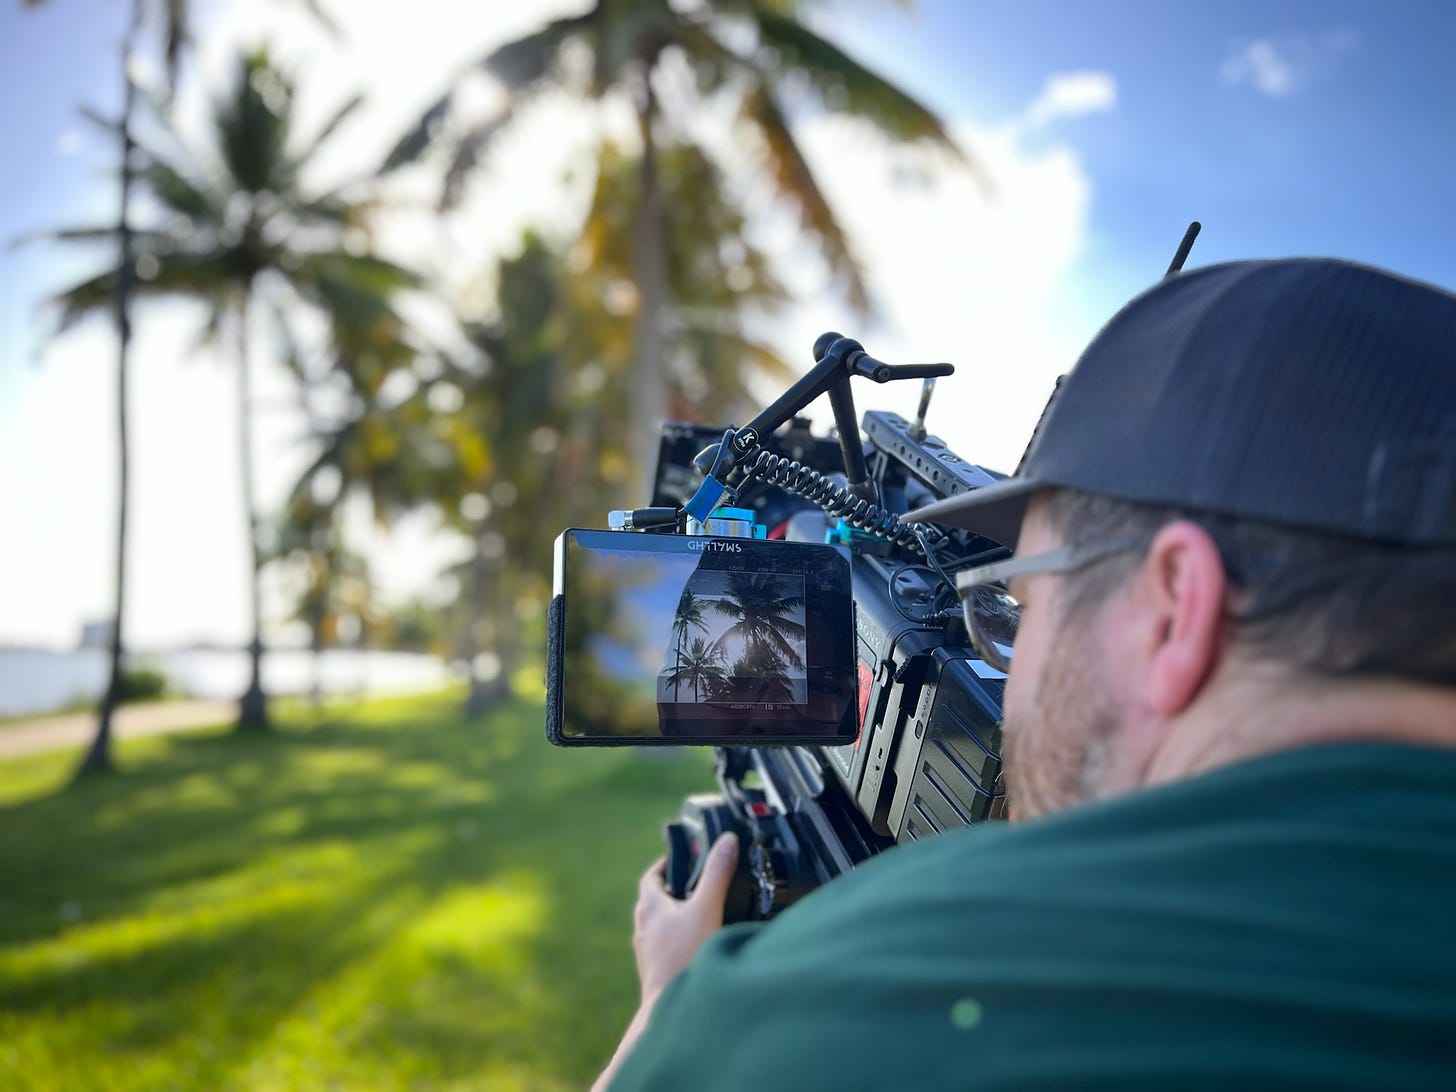 Dustin shooting a film in Puerto Rico.